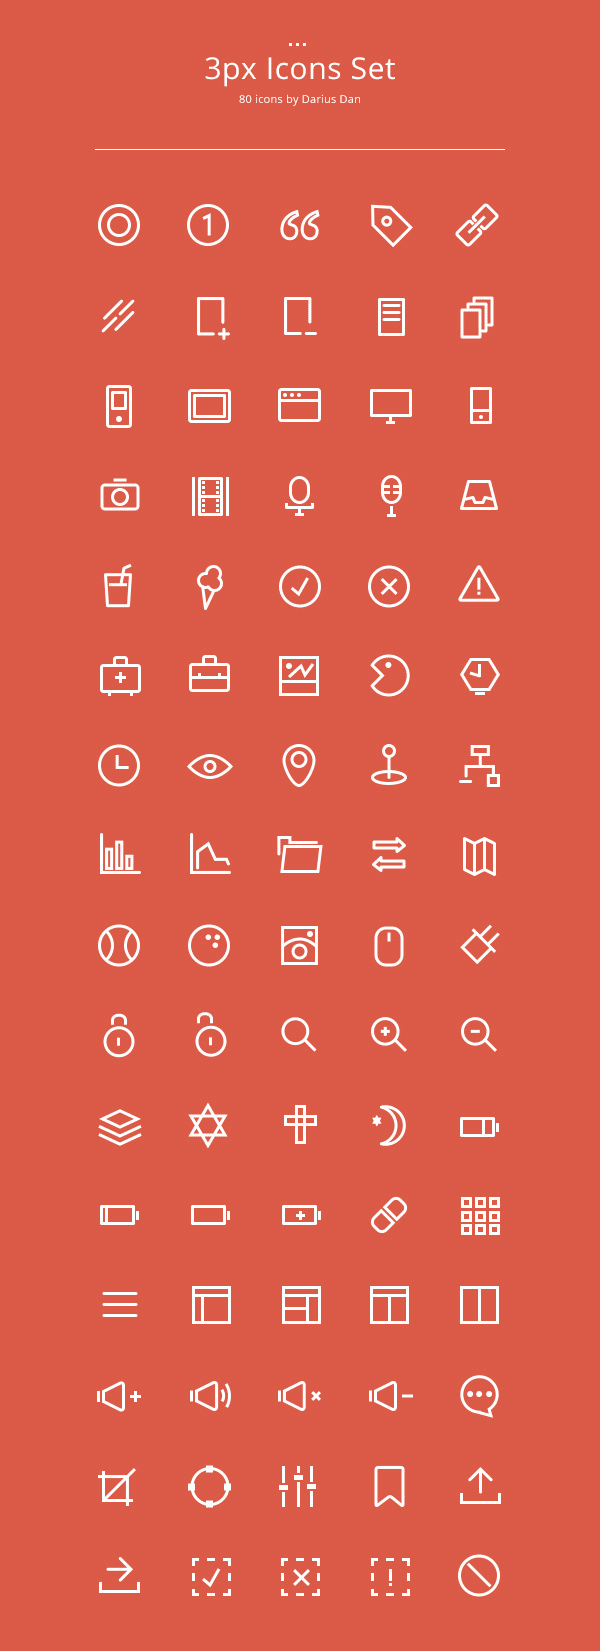 3px Outline Icons Set (80 Icons)